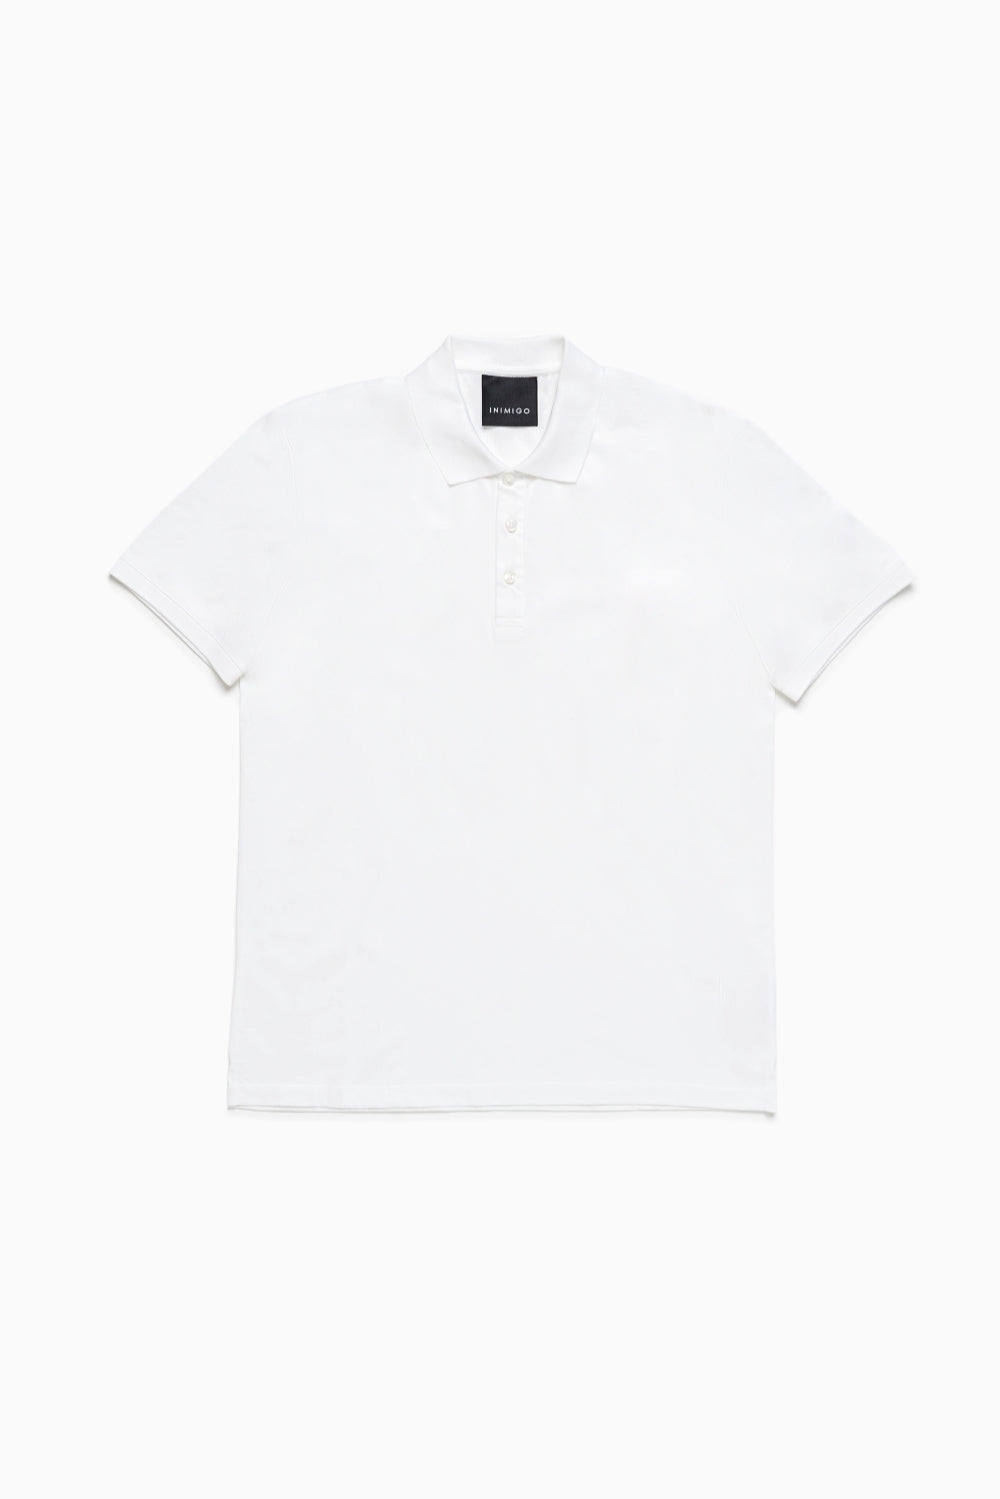 Heart Patch Jersey White Polo